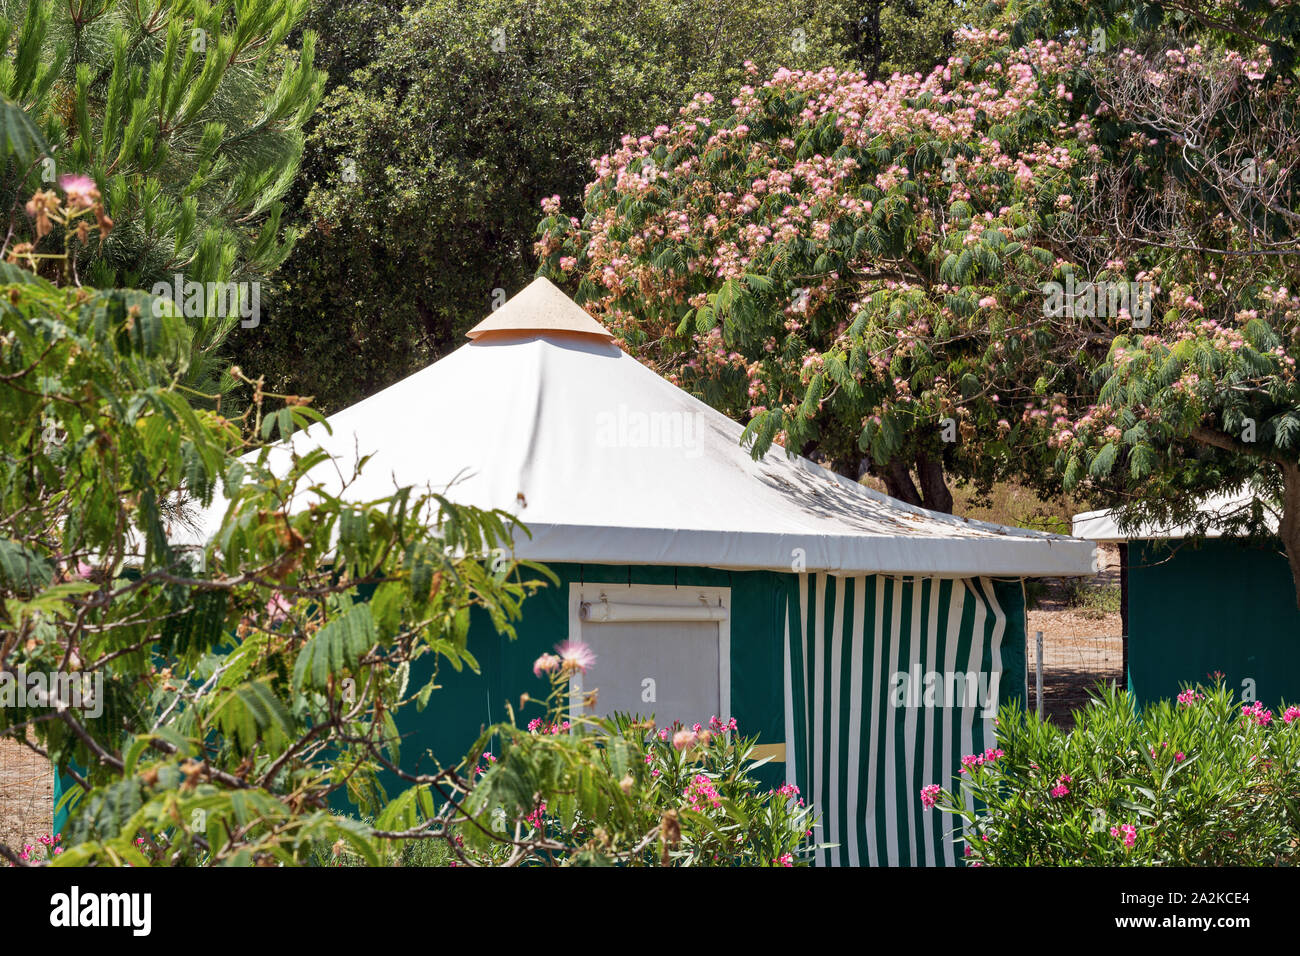 Camping houses surrounded by blossoming Albizia julibrissin trees on Corsica island, France. Stock Photo